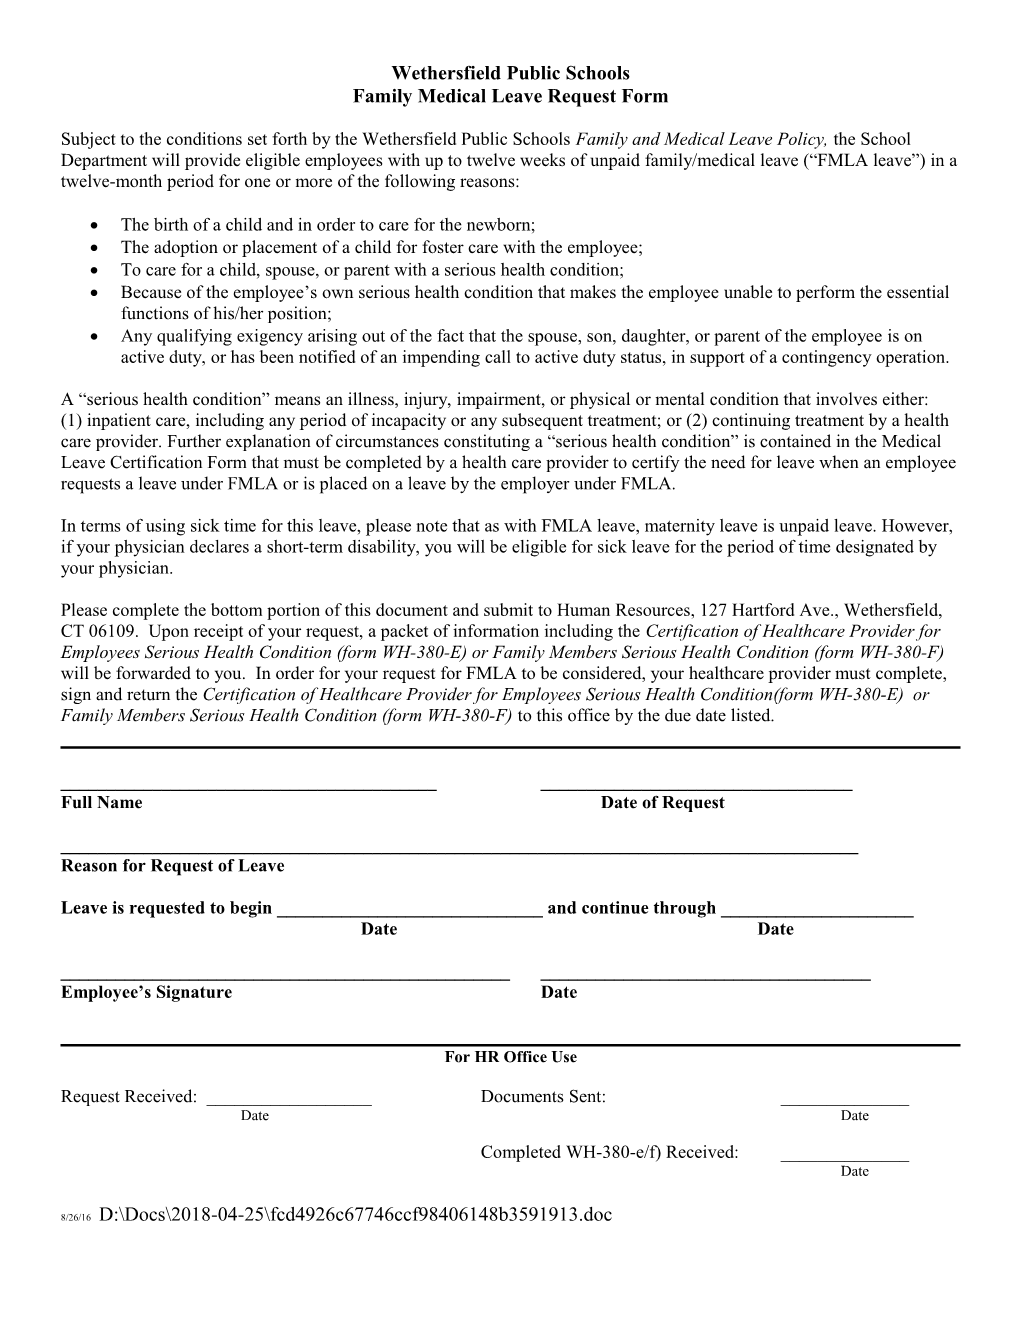 Family Medical Leave Request Form s1